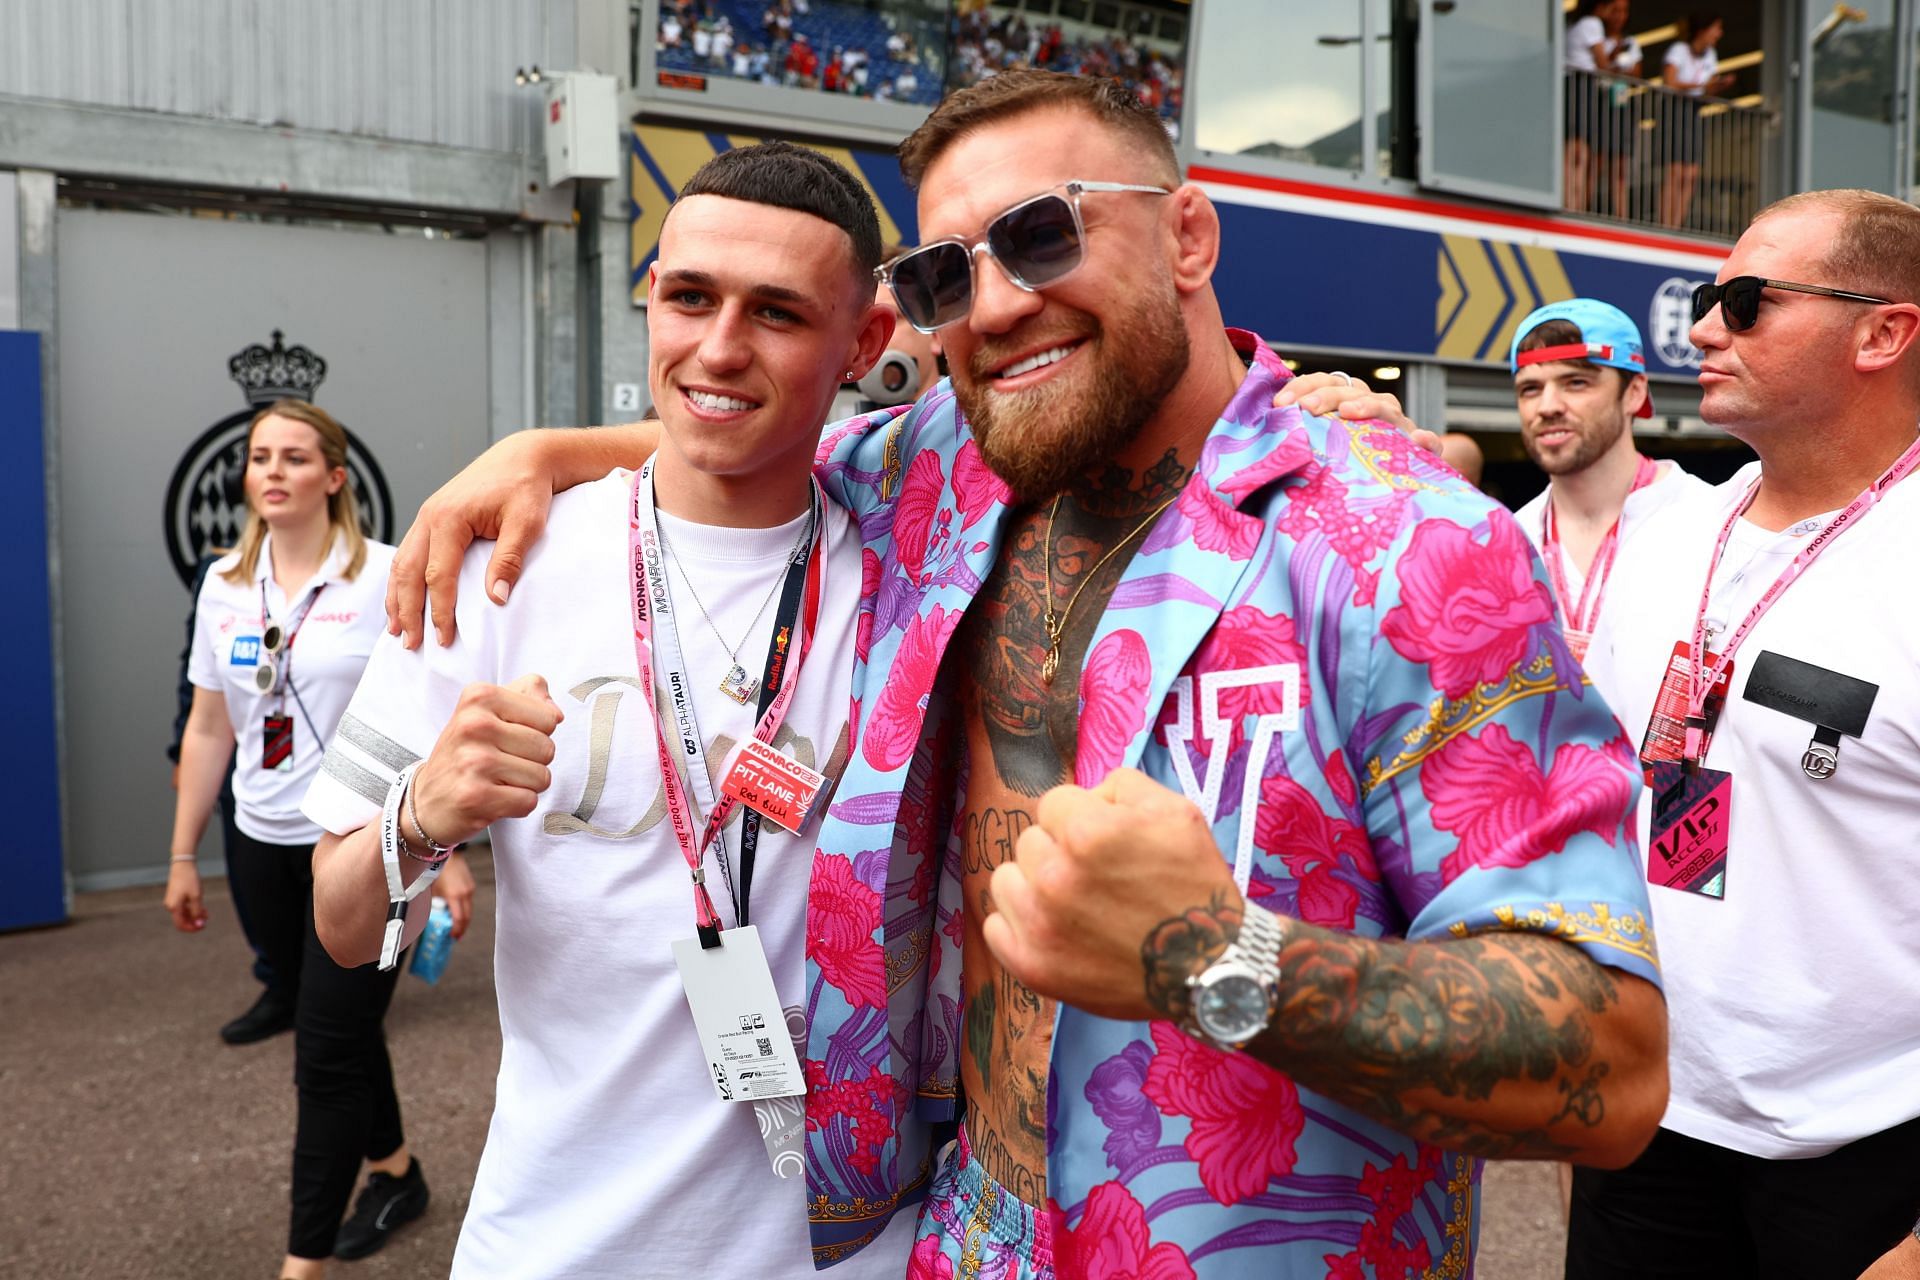 Conor McGregor attended the qualifying session of the 2022 Monaco Grand Prix